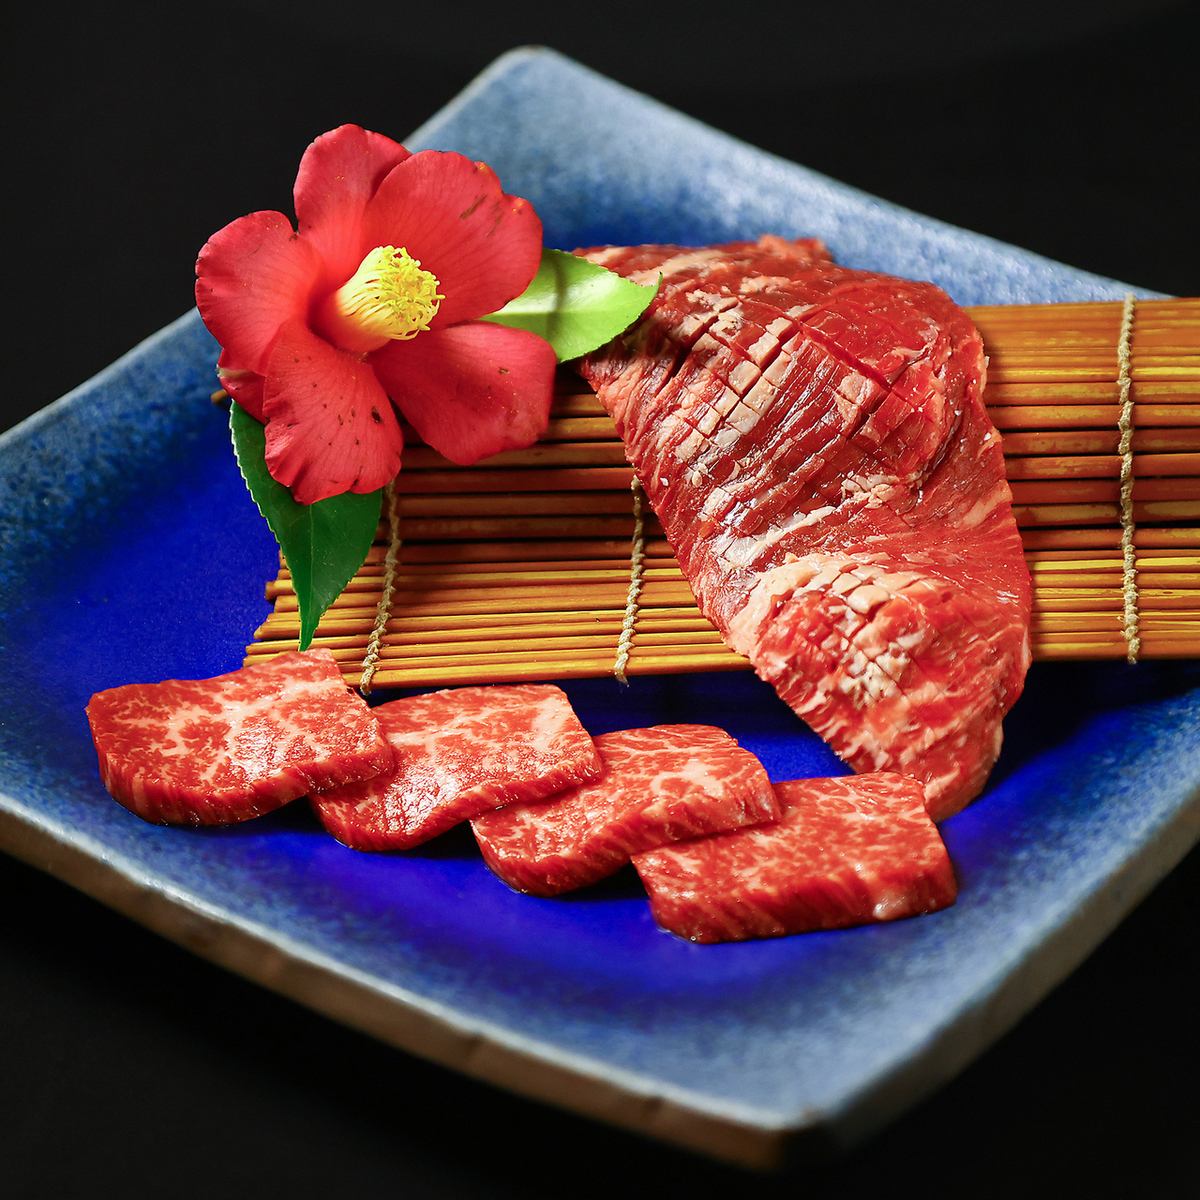 At Awaza, we only handle high-quality Japanese black beef!